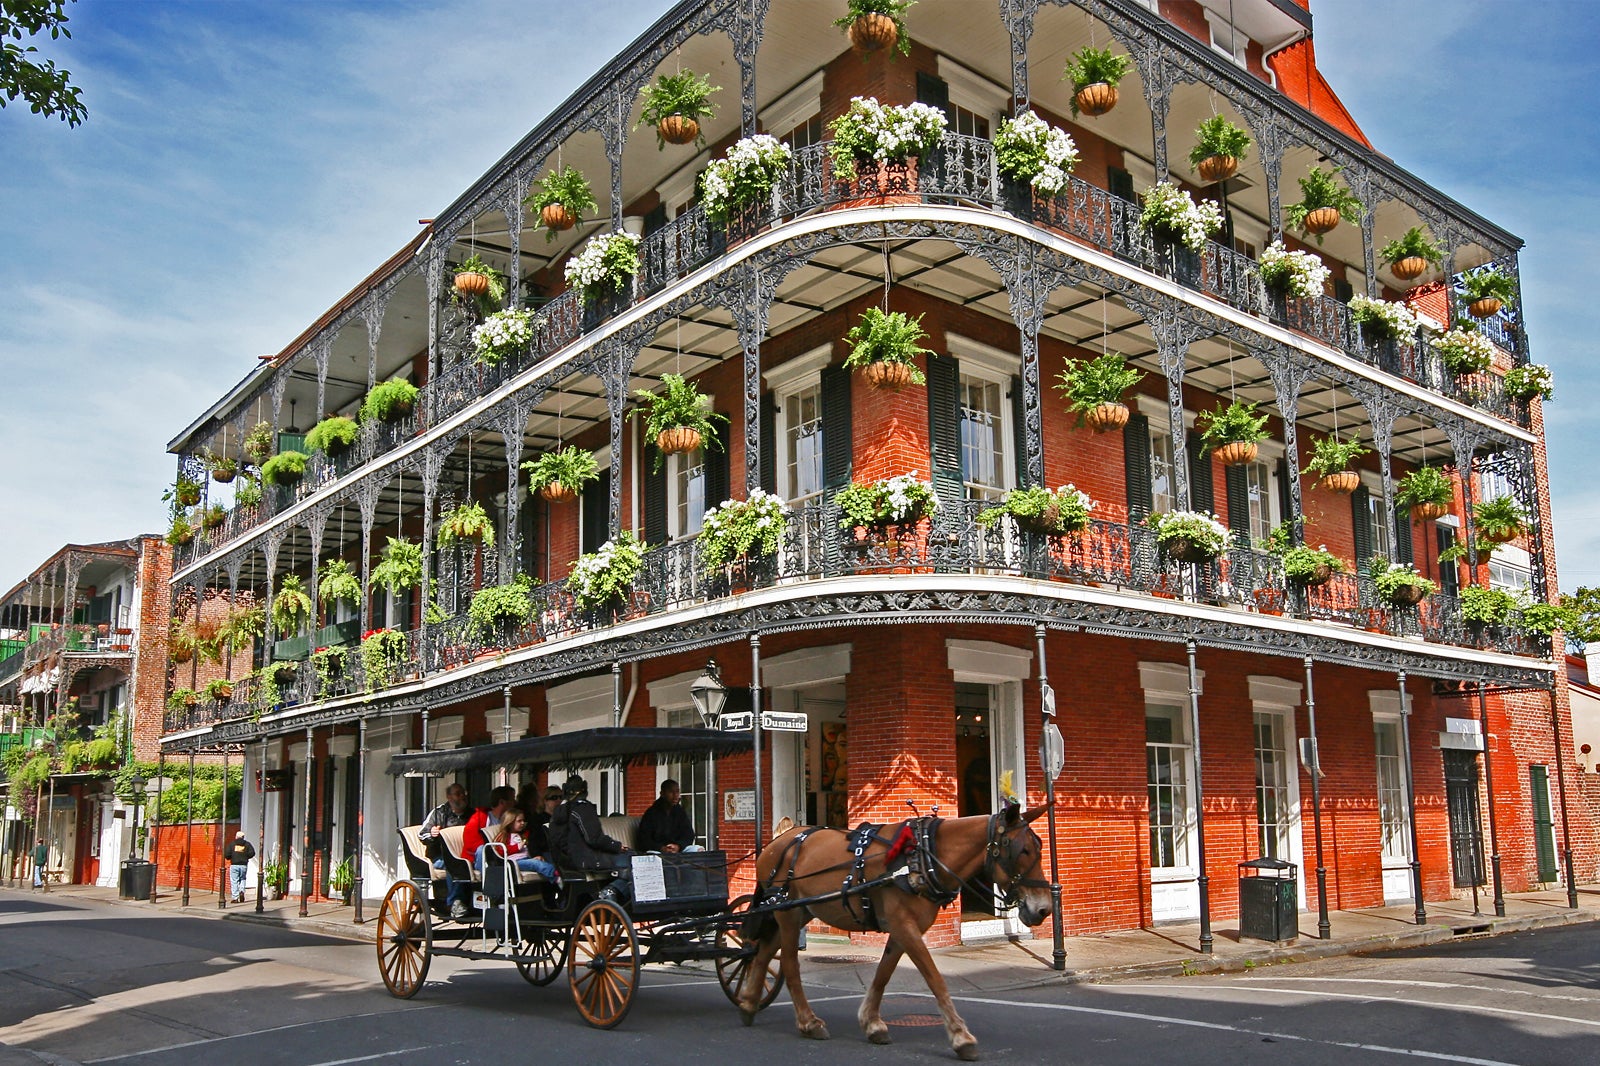 Historic buildings in French Quarter. Carriage being pulled by horse crossing the street